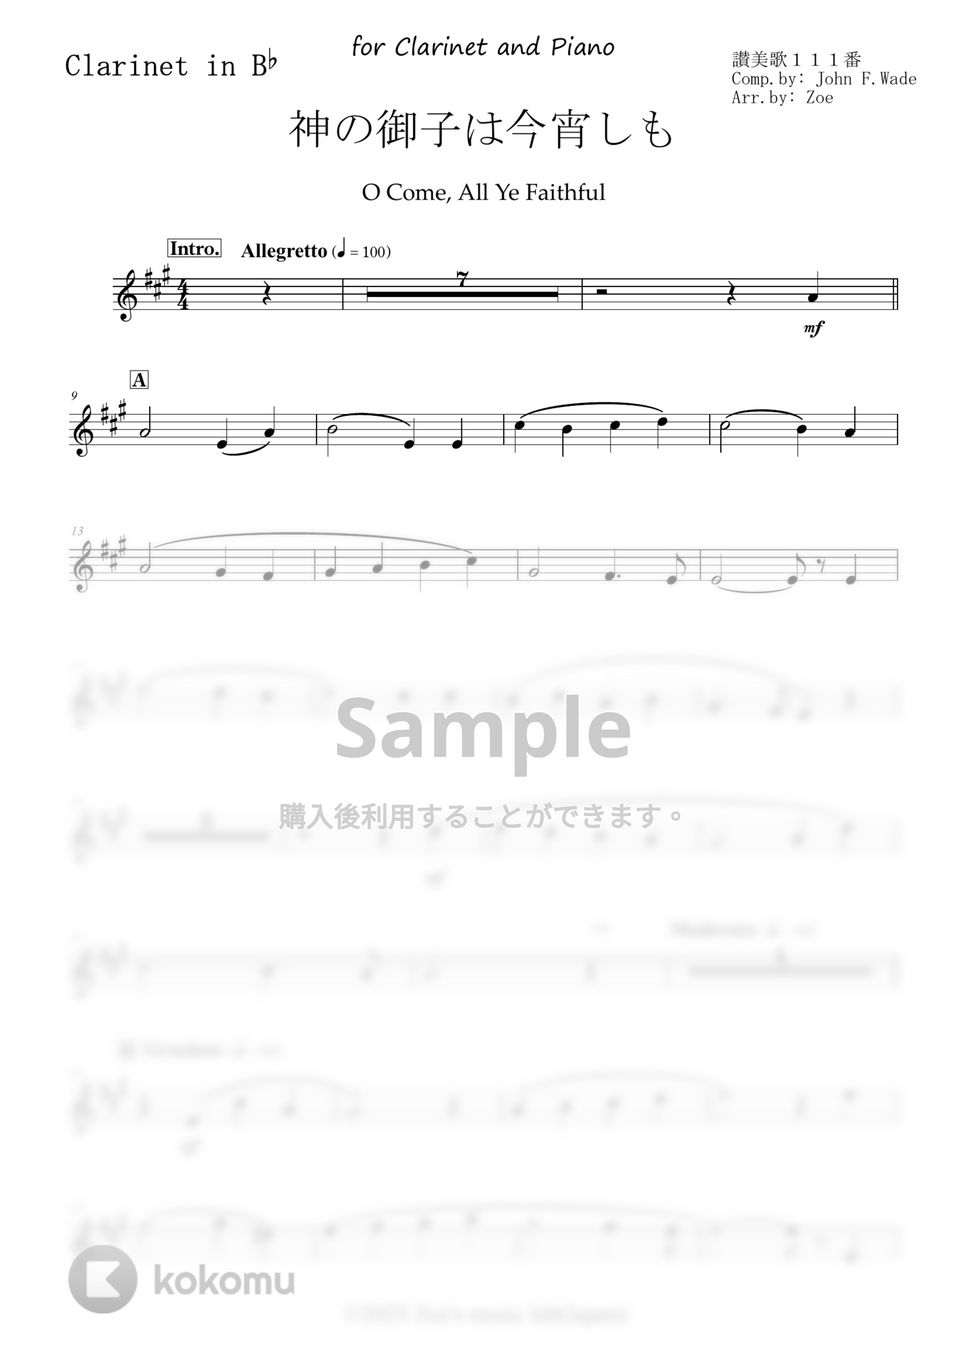 John F.Wade - 神の御子は今宵しも for Clarinet and Piano / O Come, All Ye Faithful 讃美歌111番 (クラリネット/クリスマス/讃美歌/ピアノ) by Zoe